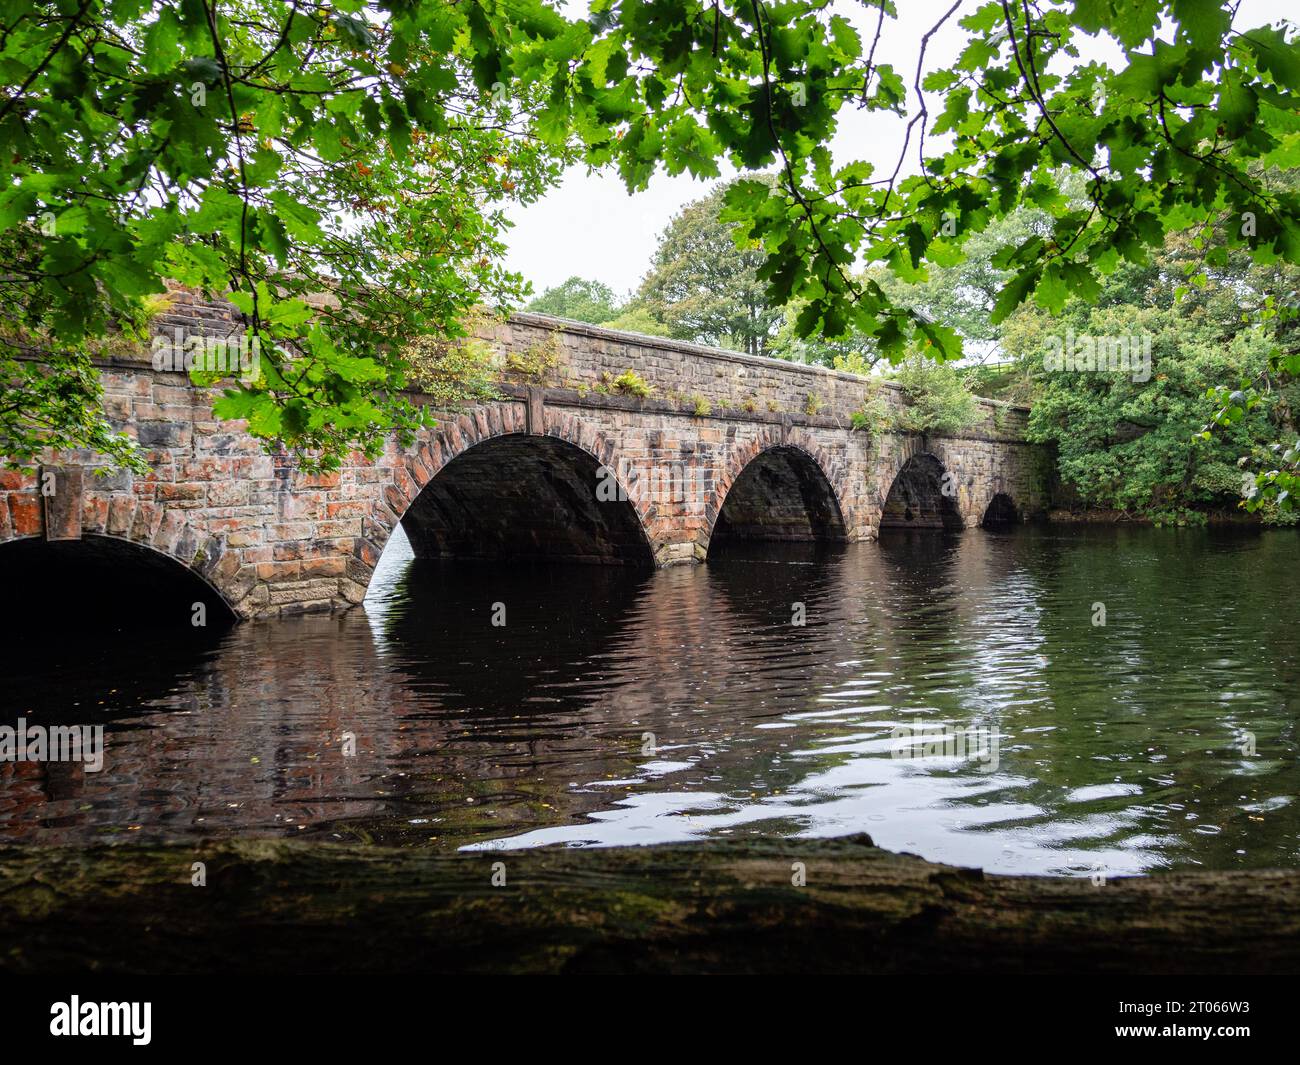 old stone built bridge spanning the dark still waters of the slow flowing river with overhanging trees, no body Stock Photo